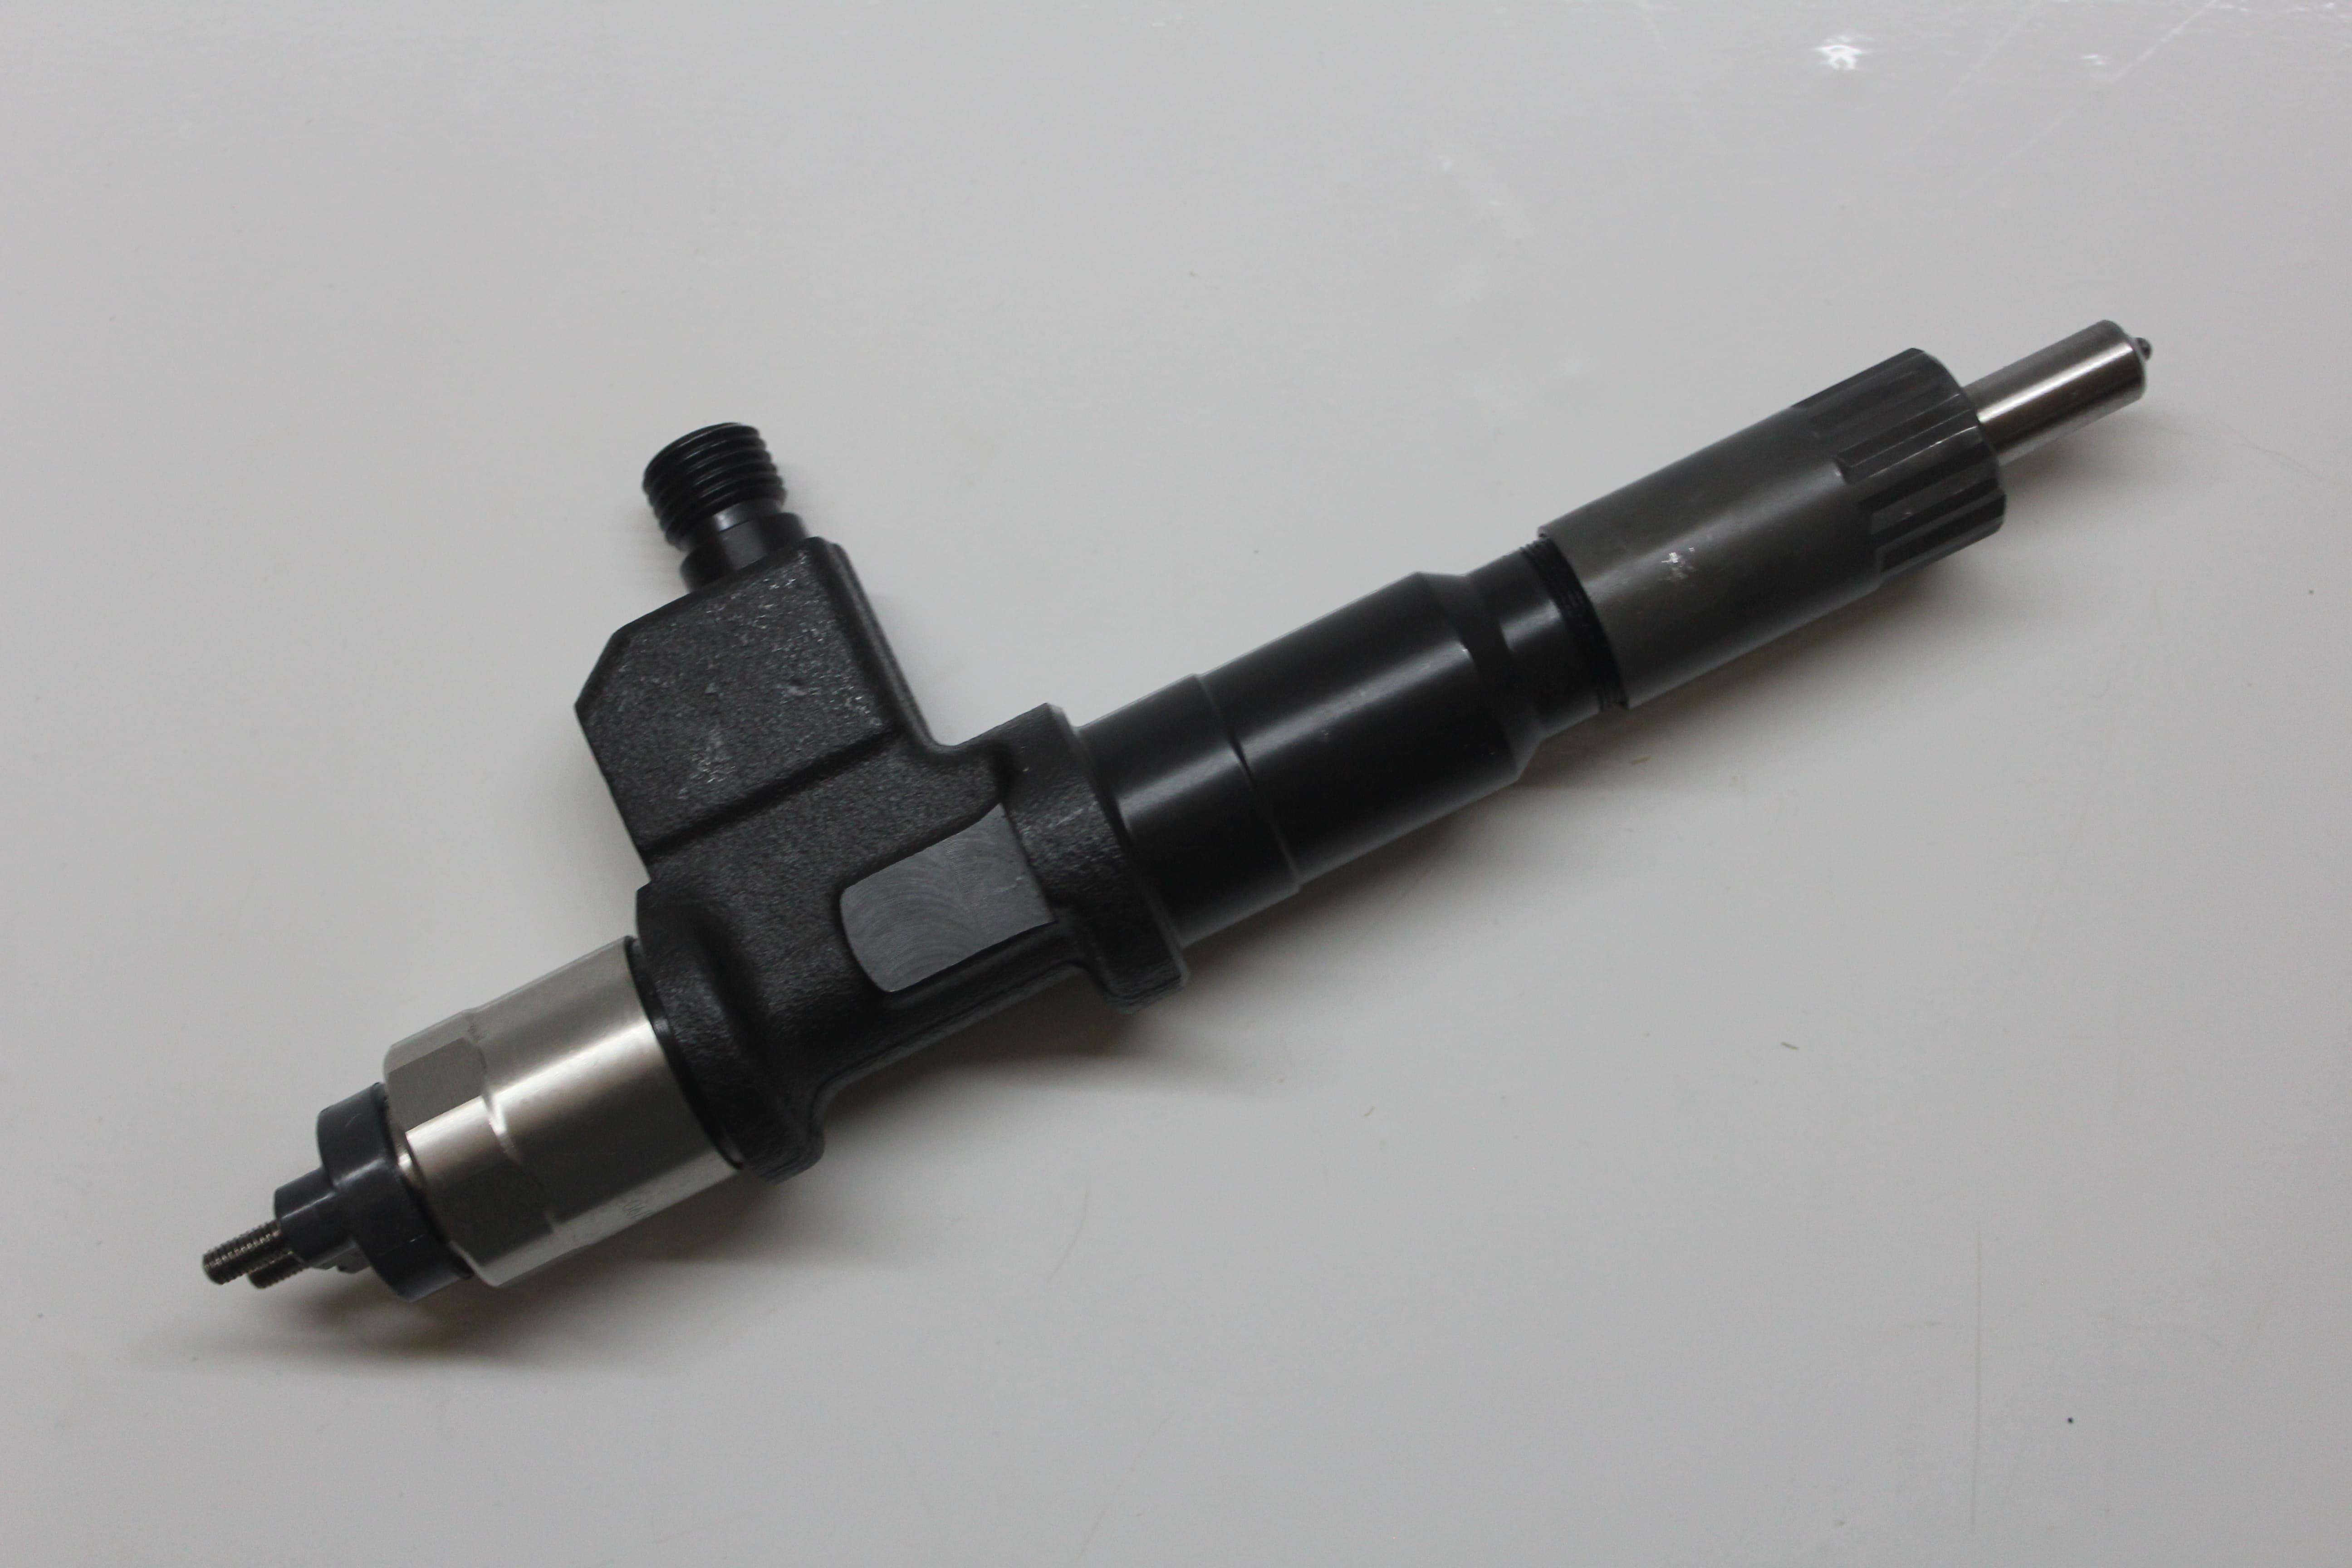 095000-6791 DENSO Форсунка Denso 095000-6790 095000-6791 095000-5950 Injector Assy for SDEC TRUCK SC9DK D28-001-801 D28-001-801+C ZDTOPA OEM Parts Injector